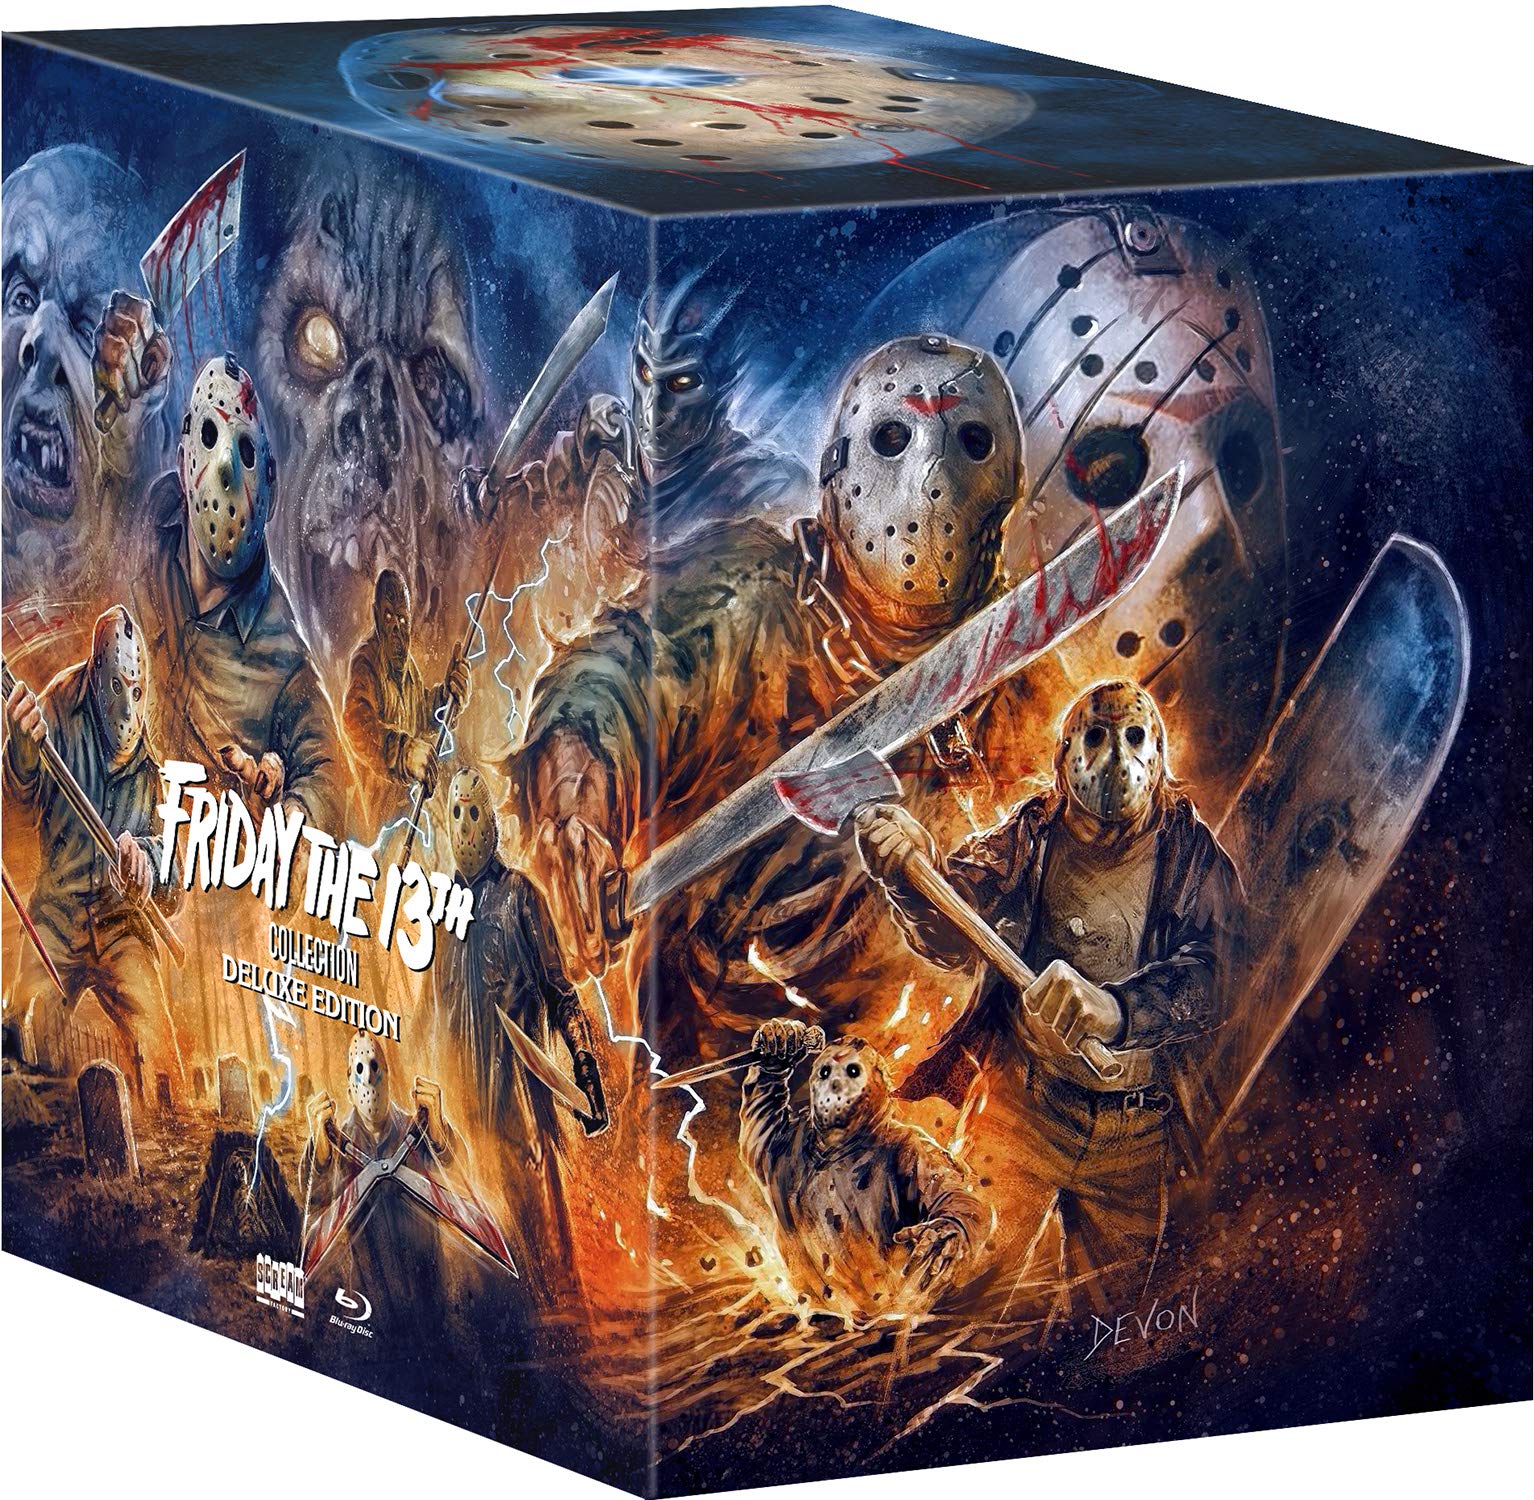 Friday the 13th Collection Blu ray $94.99 $94.99